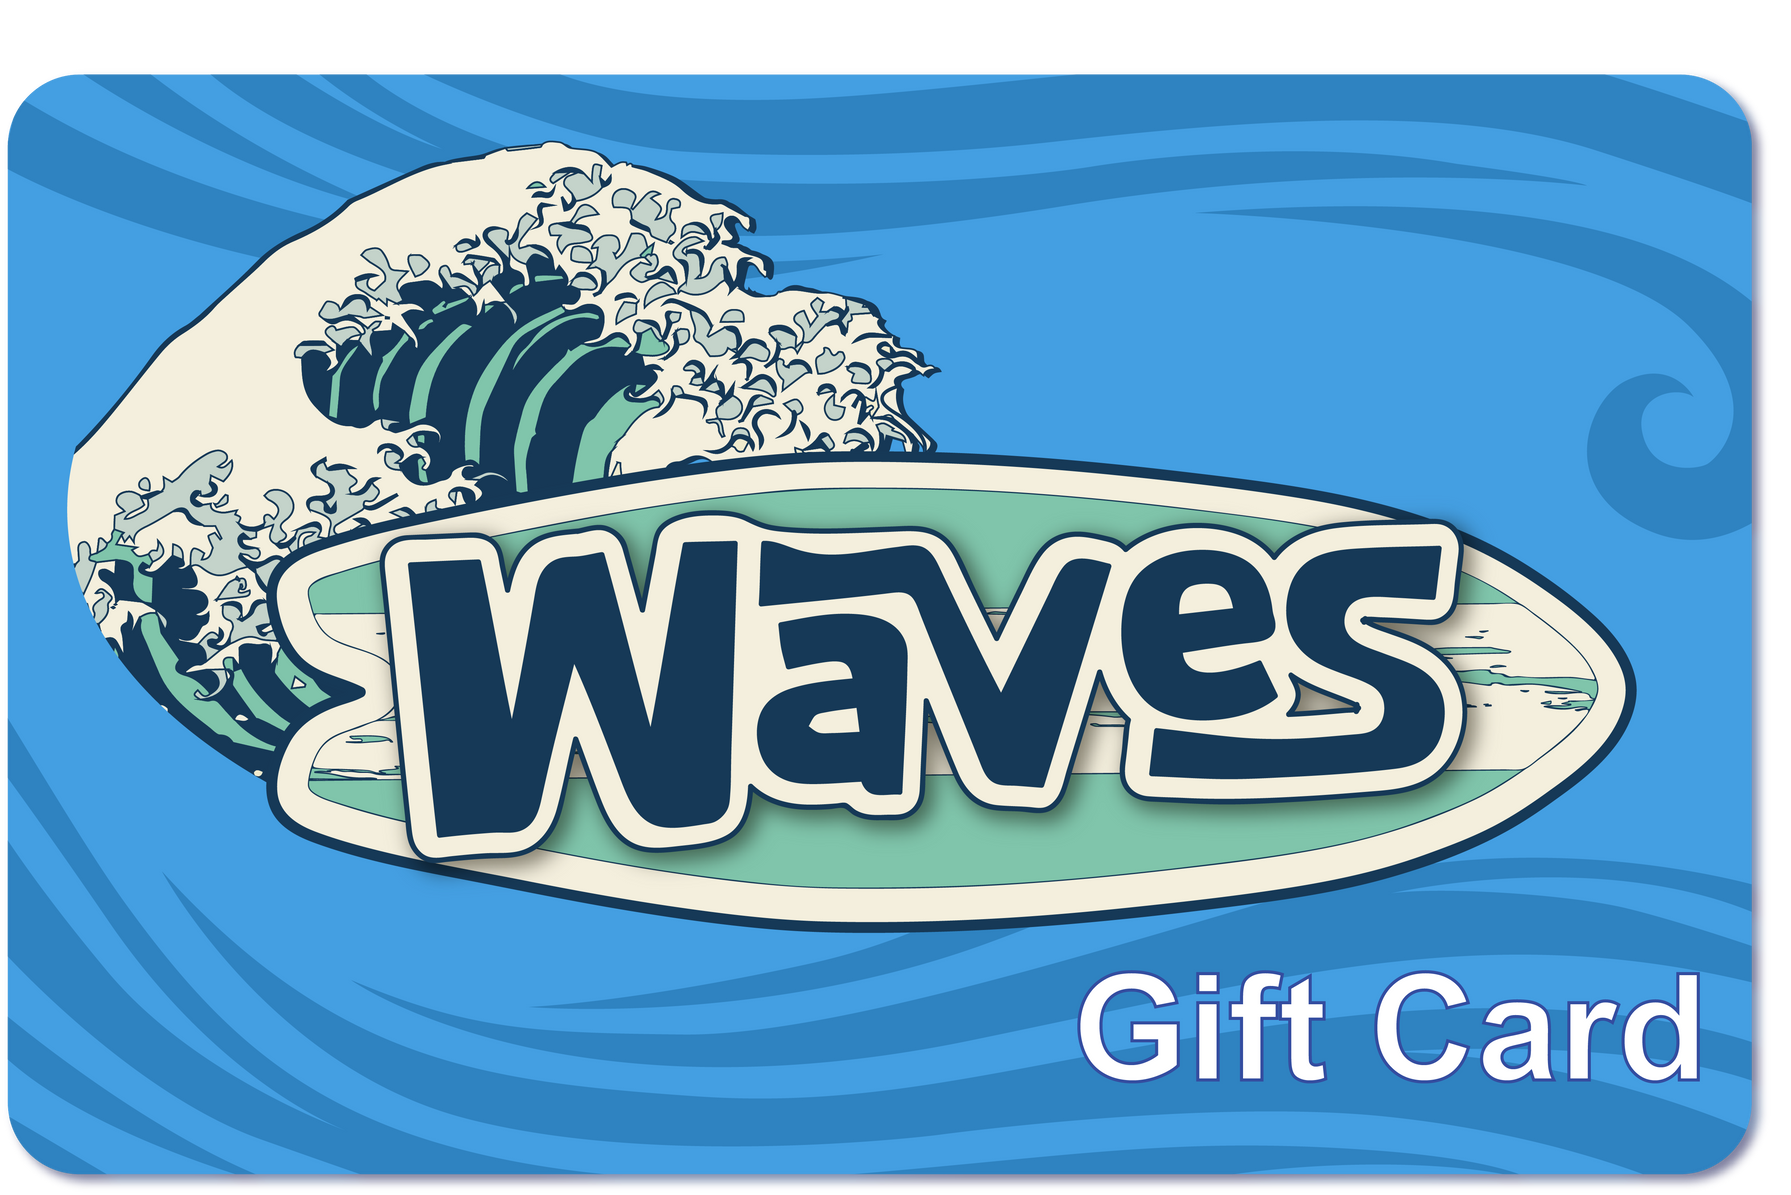 WAVES CAR WASH LOGO ON A CAR WASH GIFT CARD - SURFBOARD WITH THE GREAT WAVE